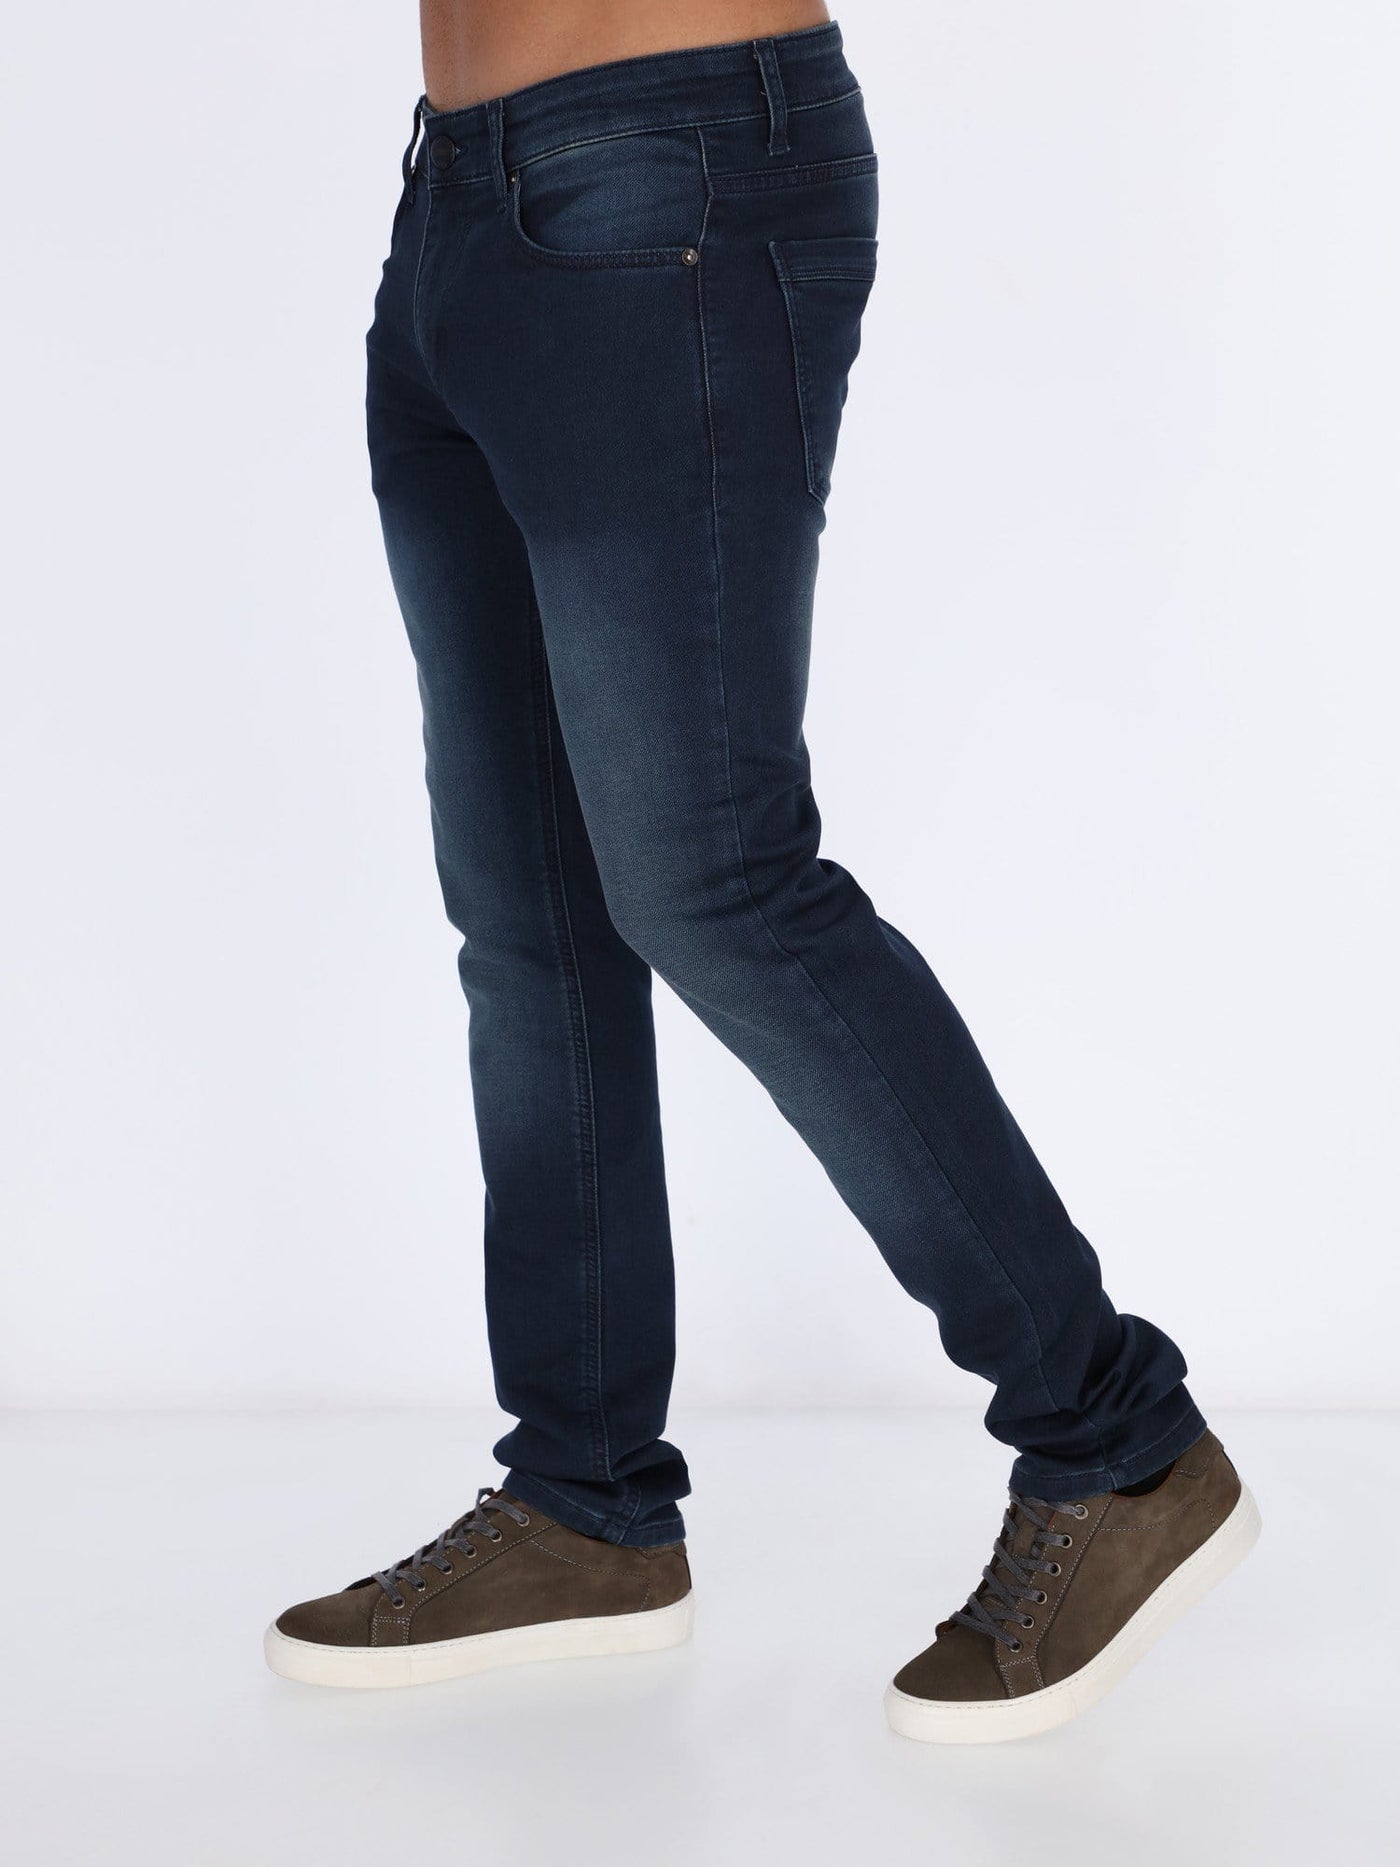 Daniel Hechter Jeans Navy / 30 Washed Effect Jeans Pants